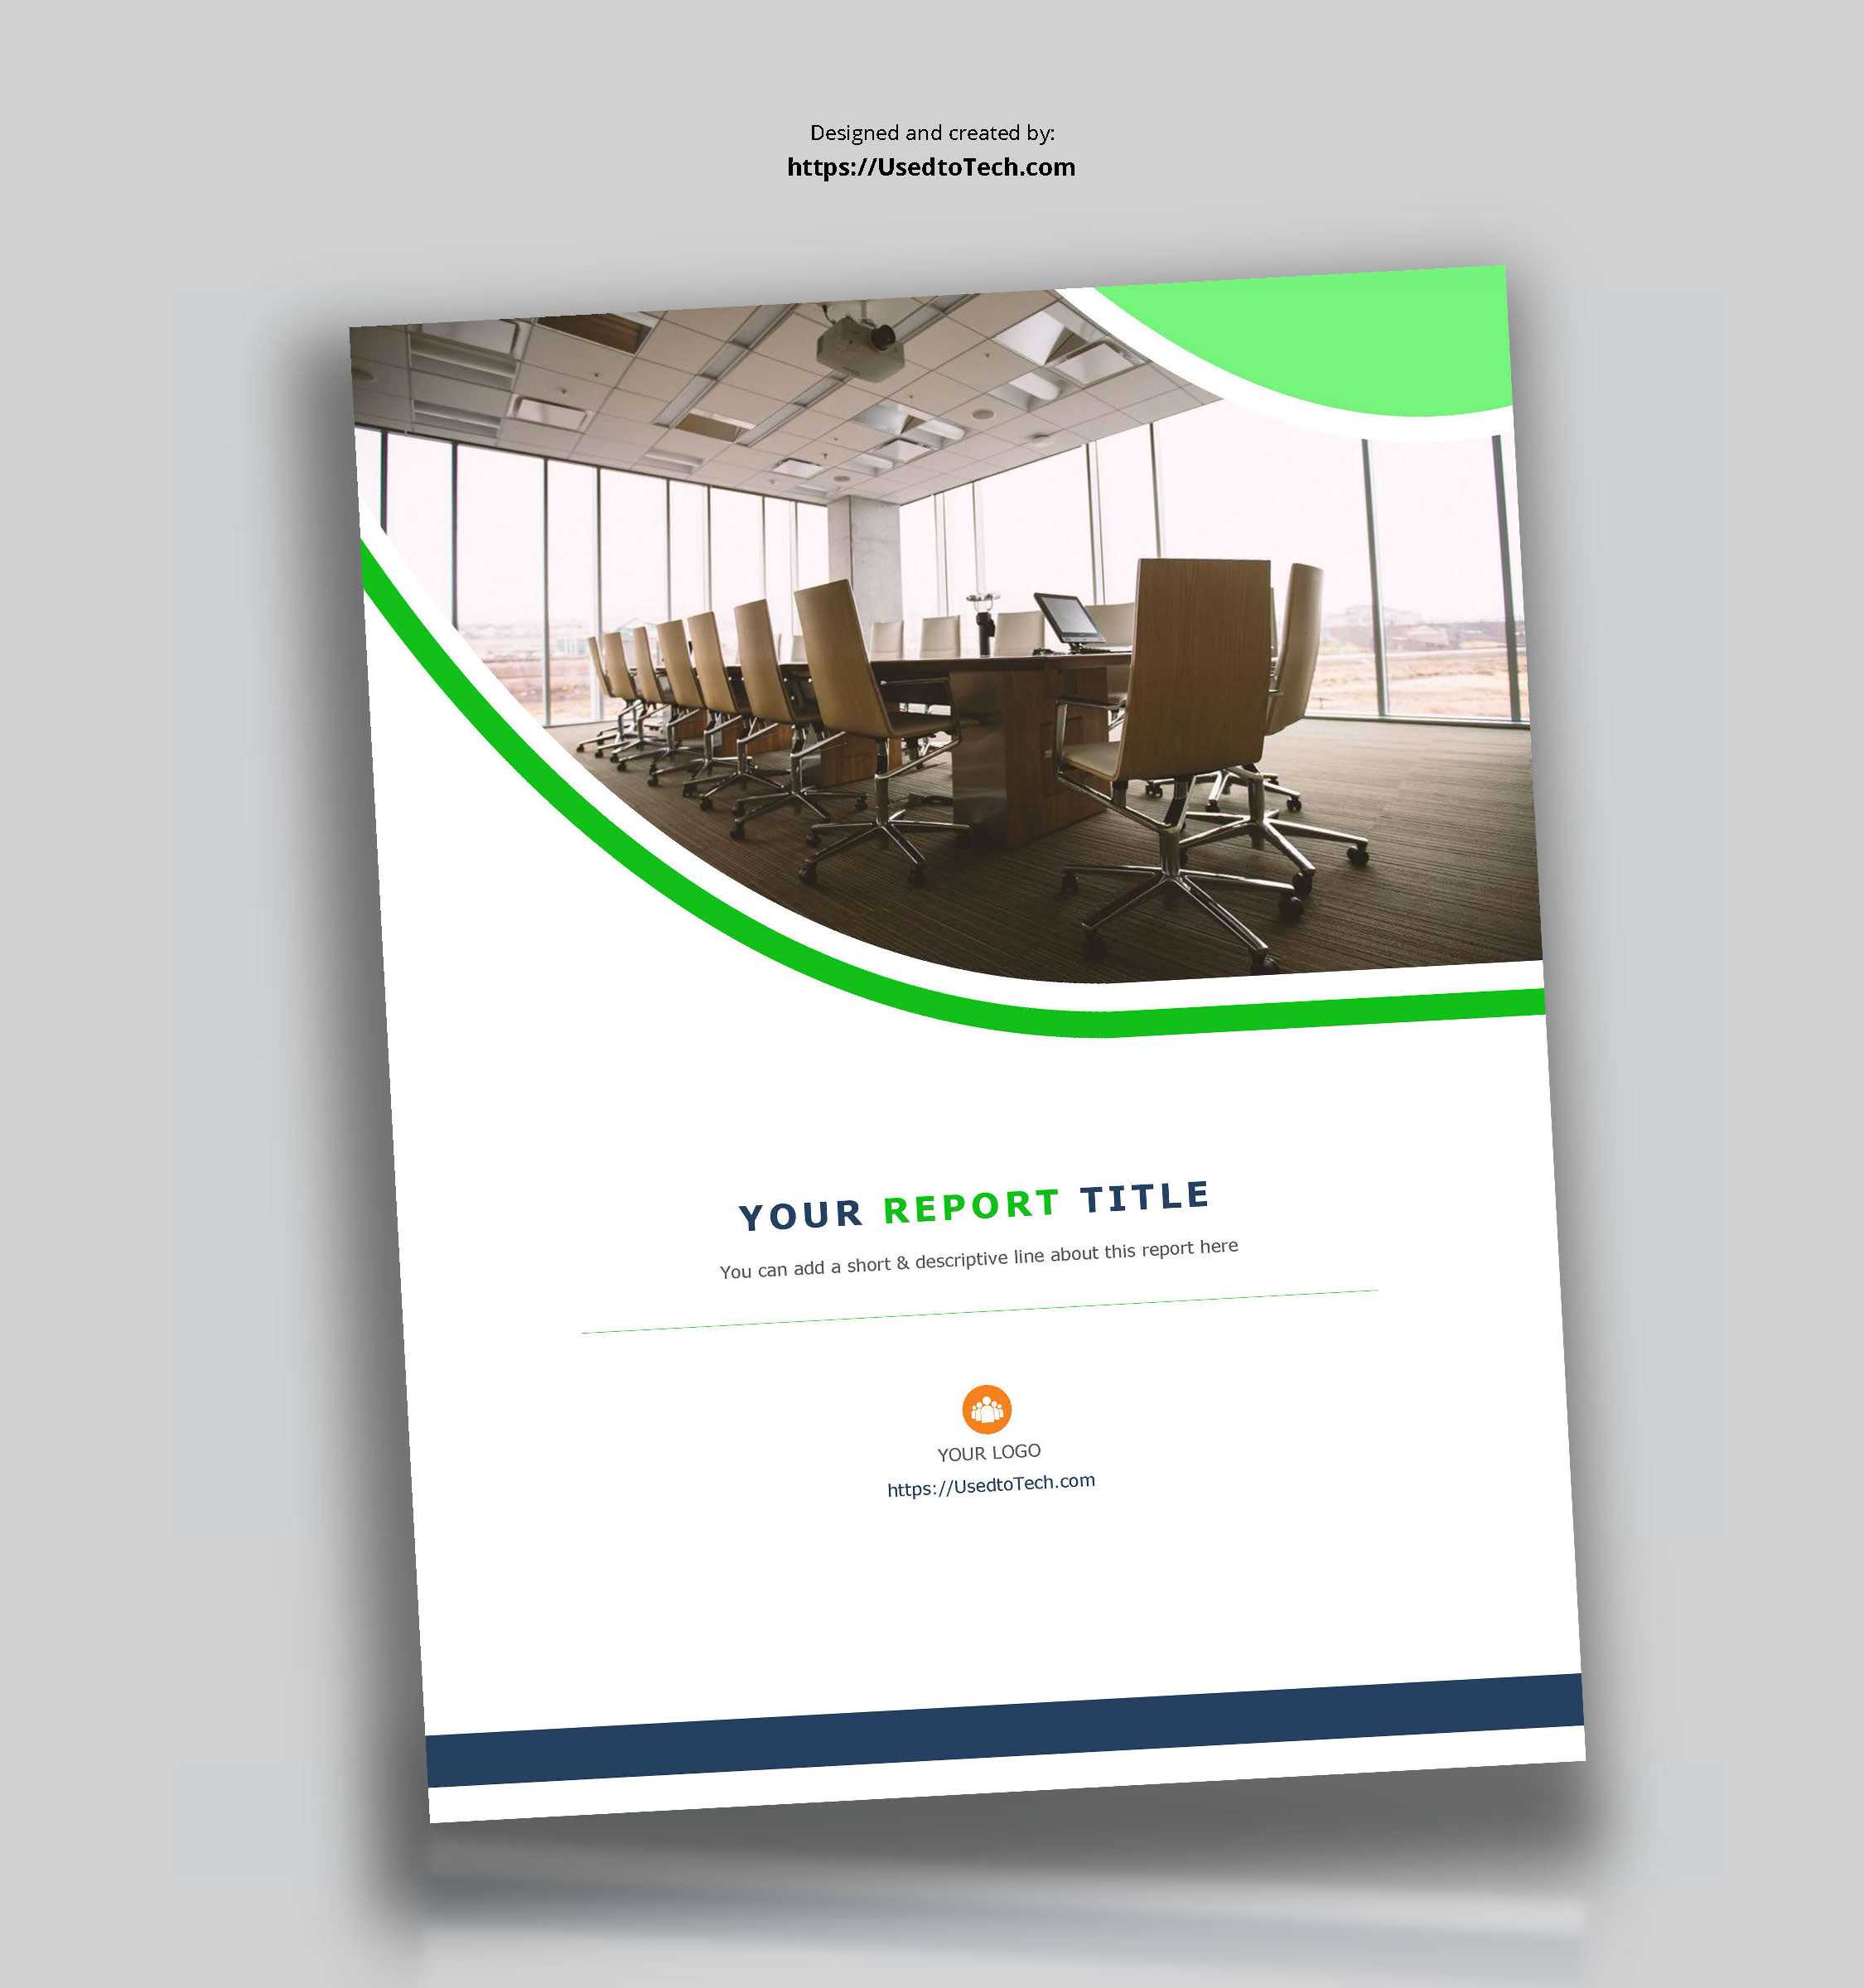 Corporate Report Design Template In Microsoft Word – Used To For It Report Template For Word